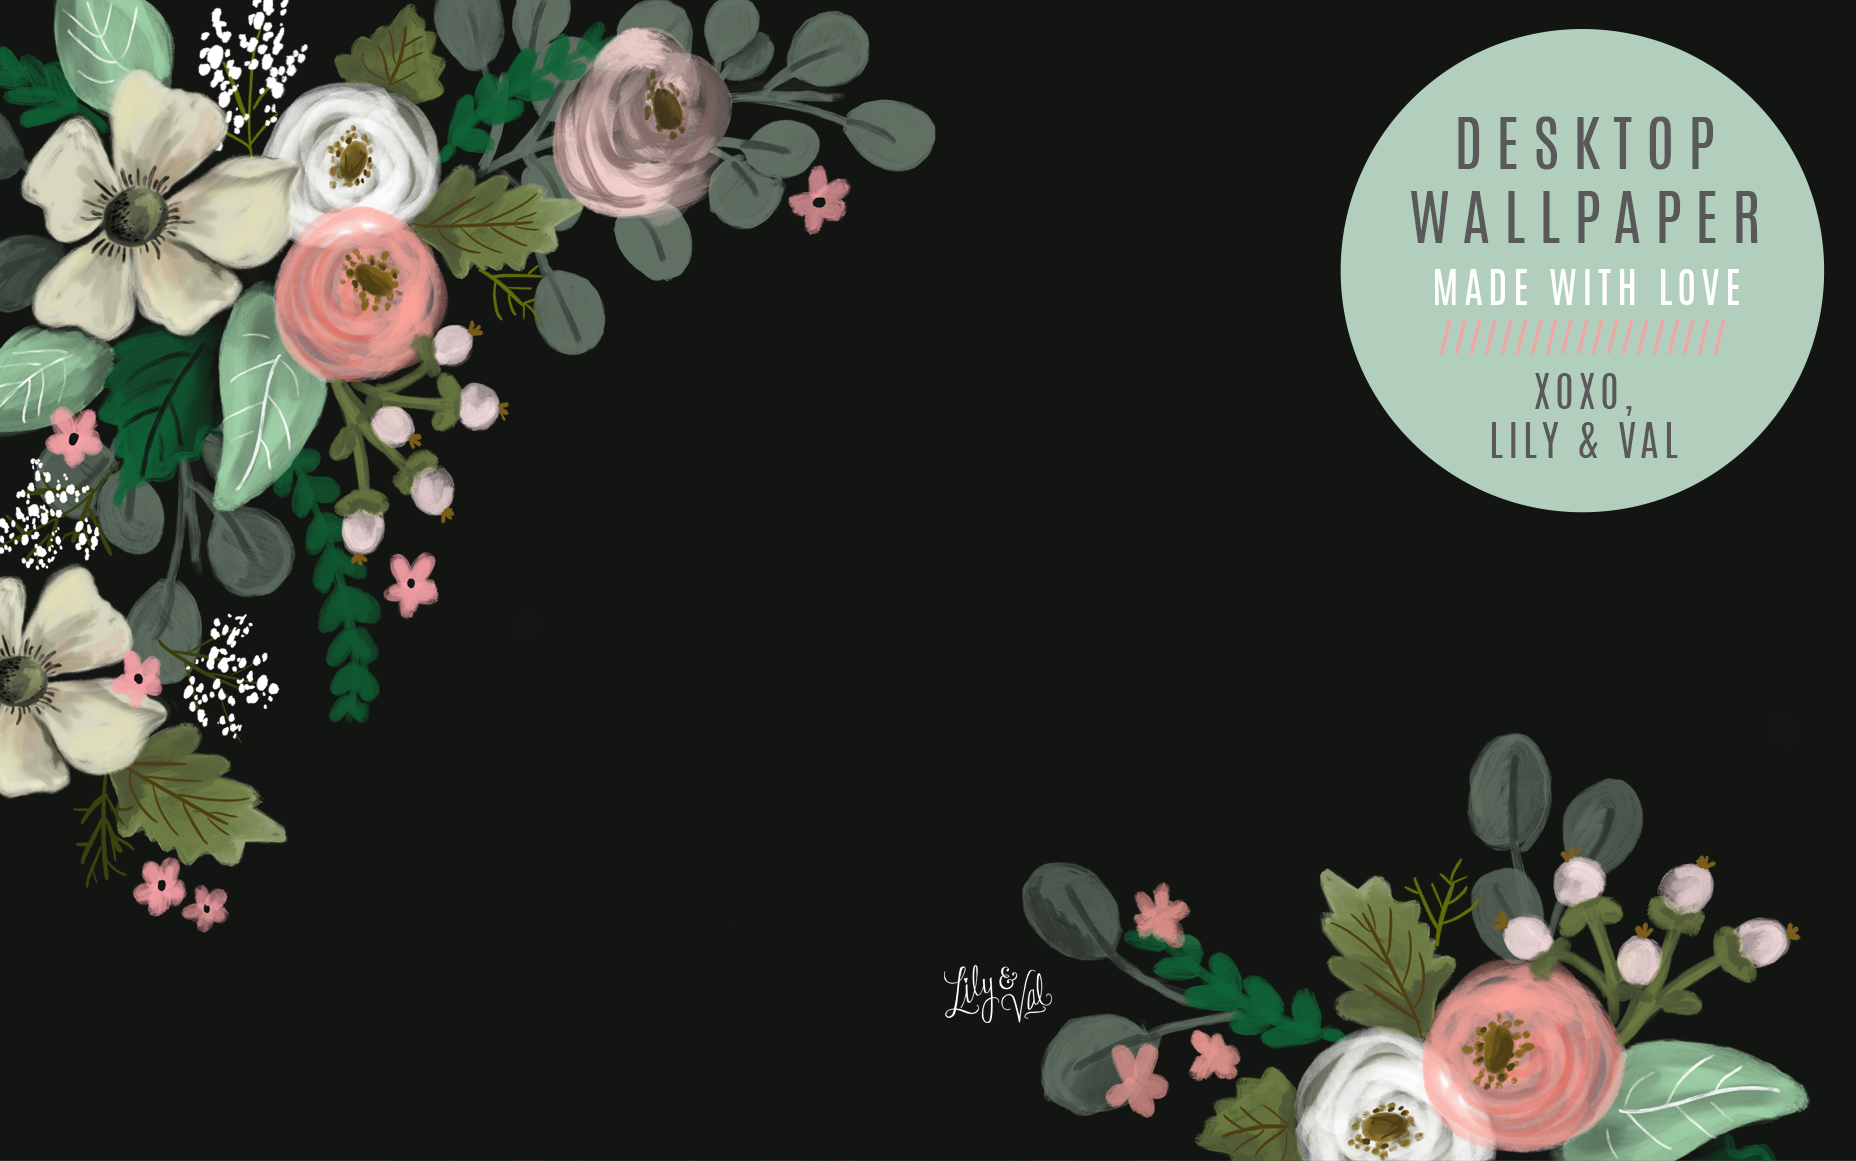 June's Floral FREE Wallpaper Download based on the Lily & Val National Stationery Show Booth Backdrop